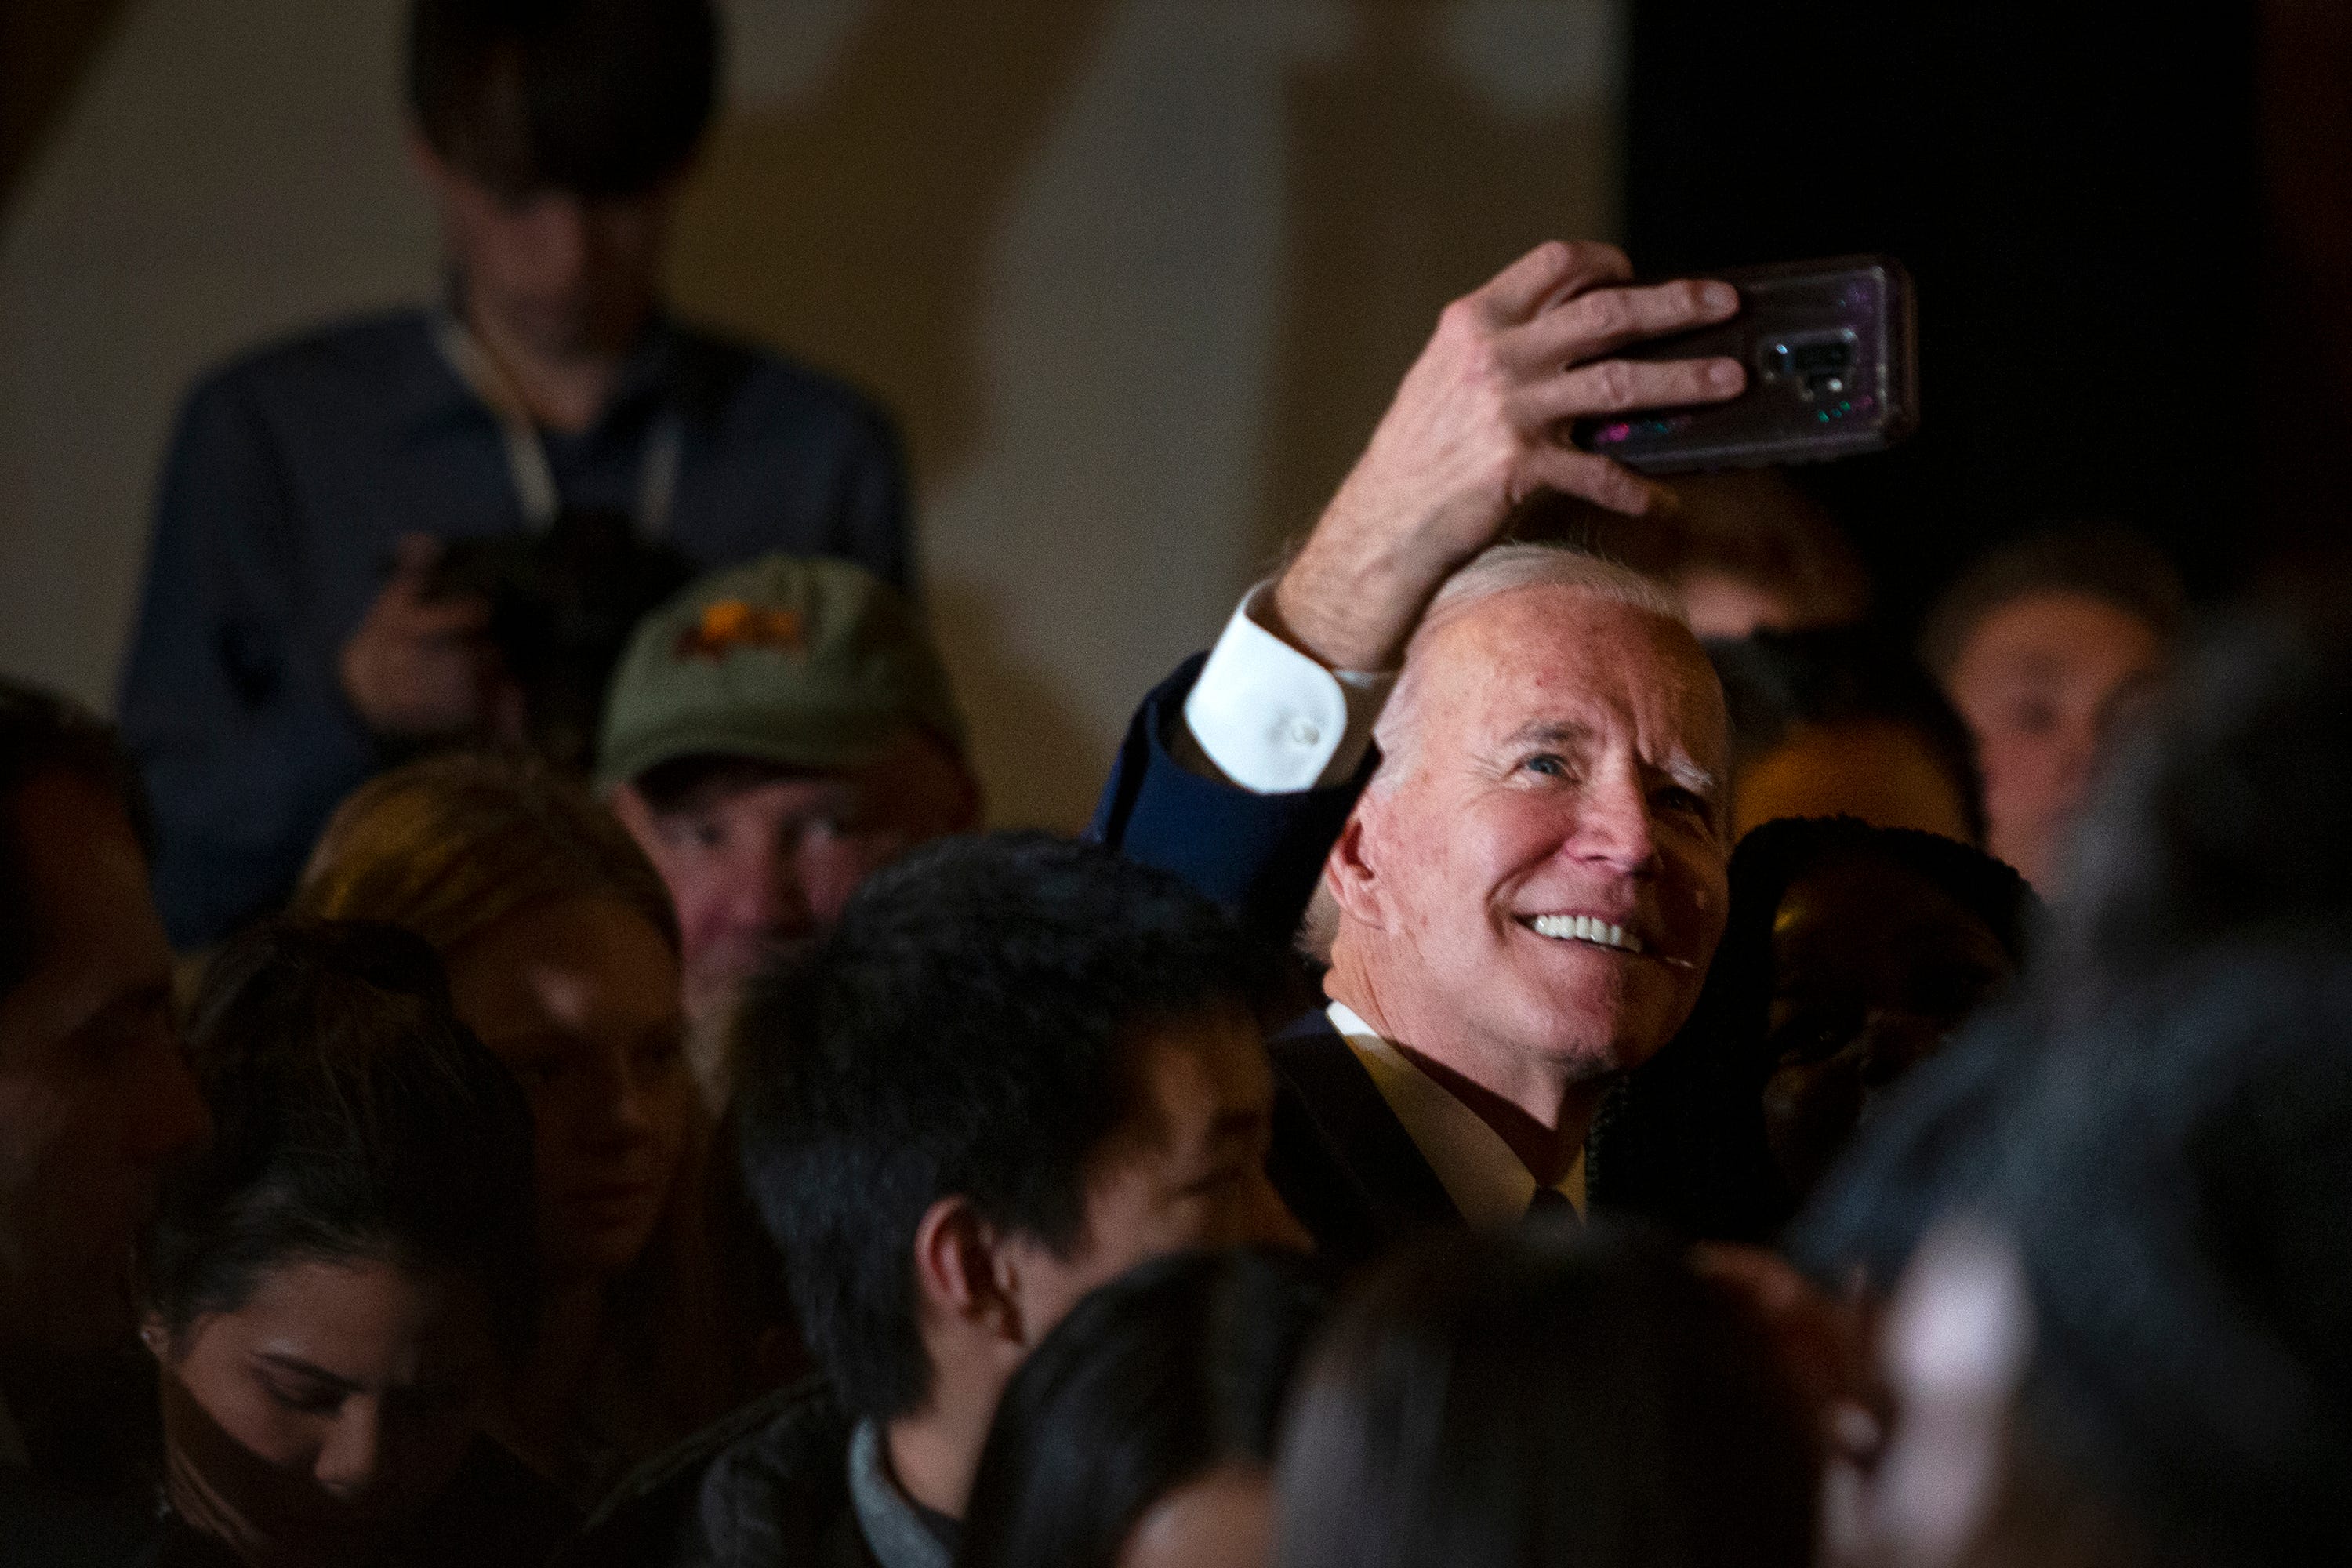 3:52 p.m. — Former Vice President Joe Biden takes selfies with spectators following his campaign event on Jan. 18, 2020 at Simpson College's Pfeiffer Hall.